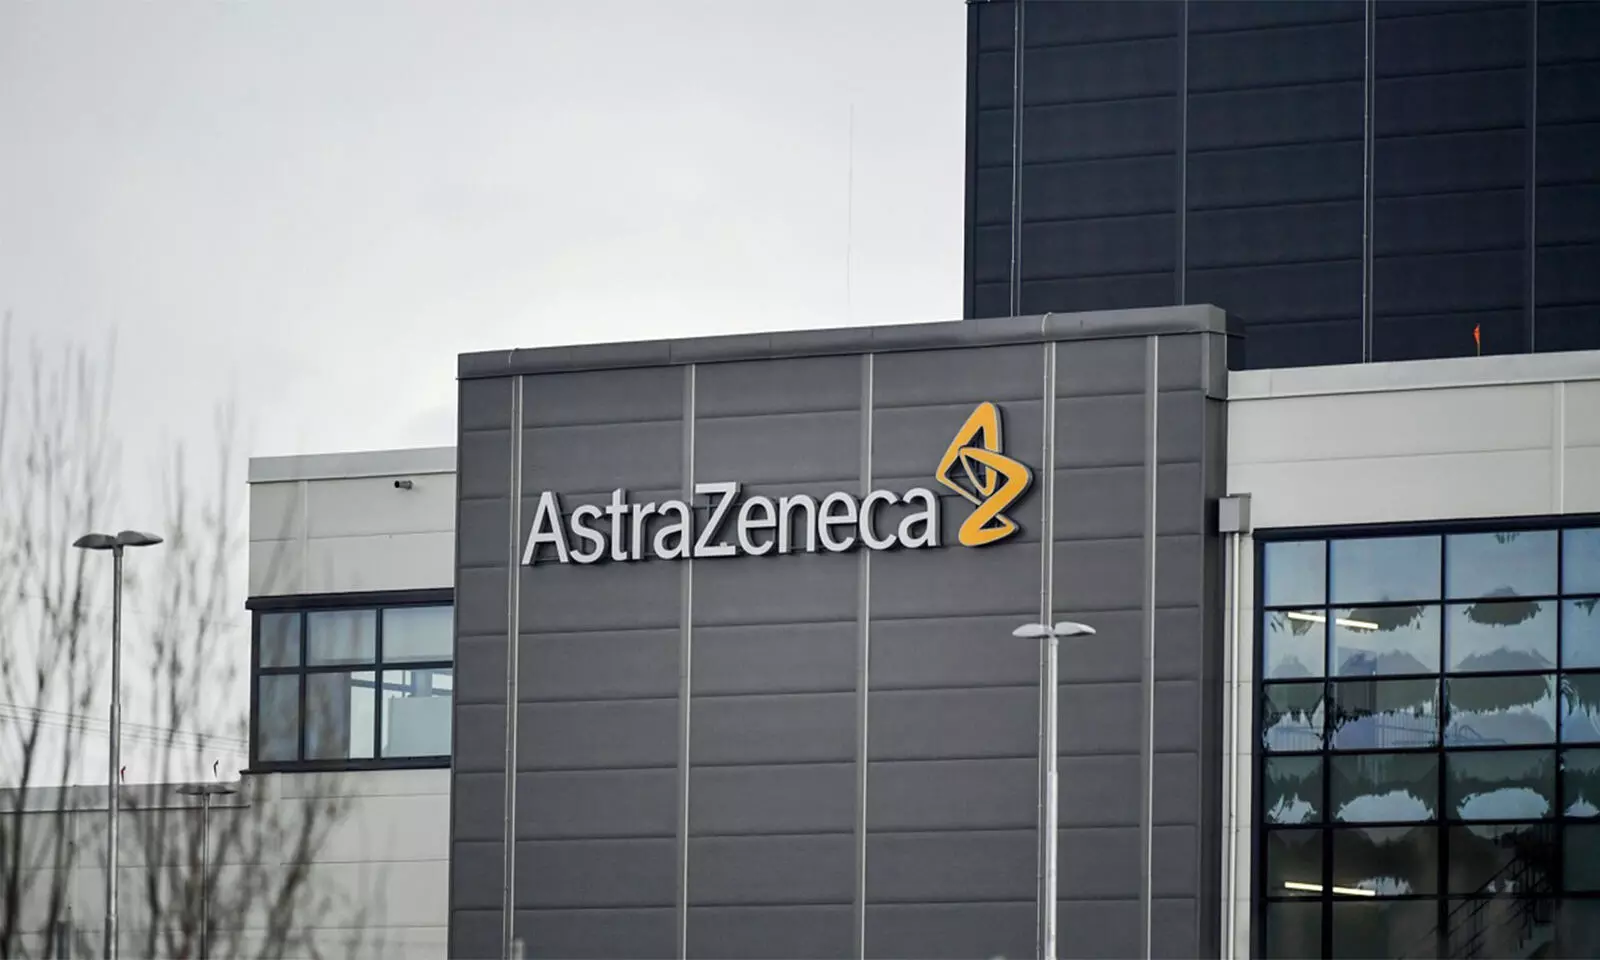 AstraZeneca Evusheld recommended for approval in EU for prevention of COVID